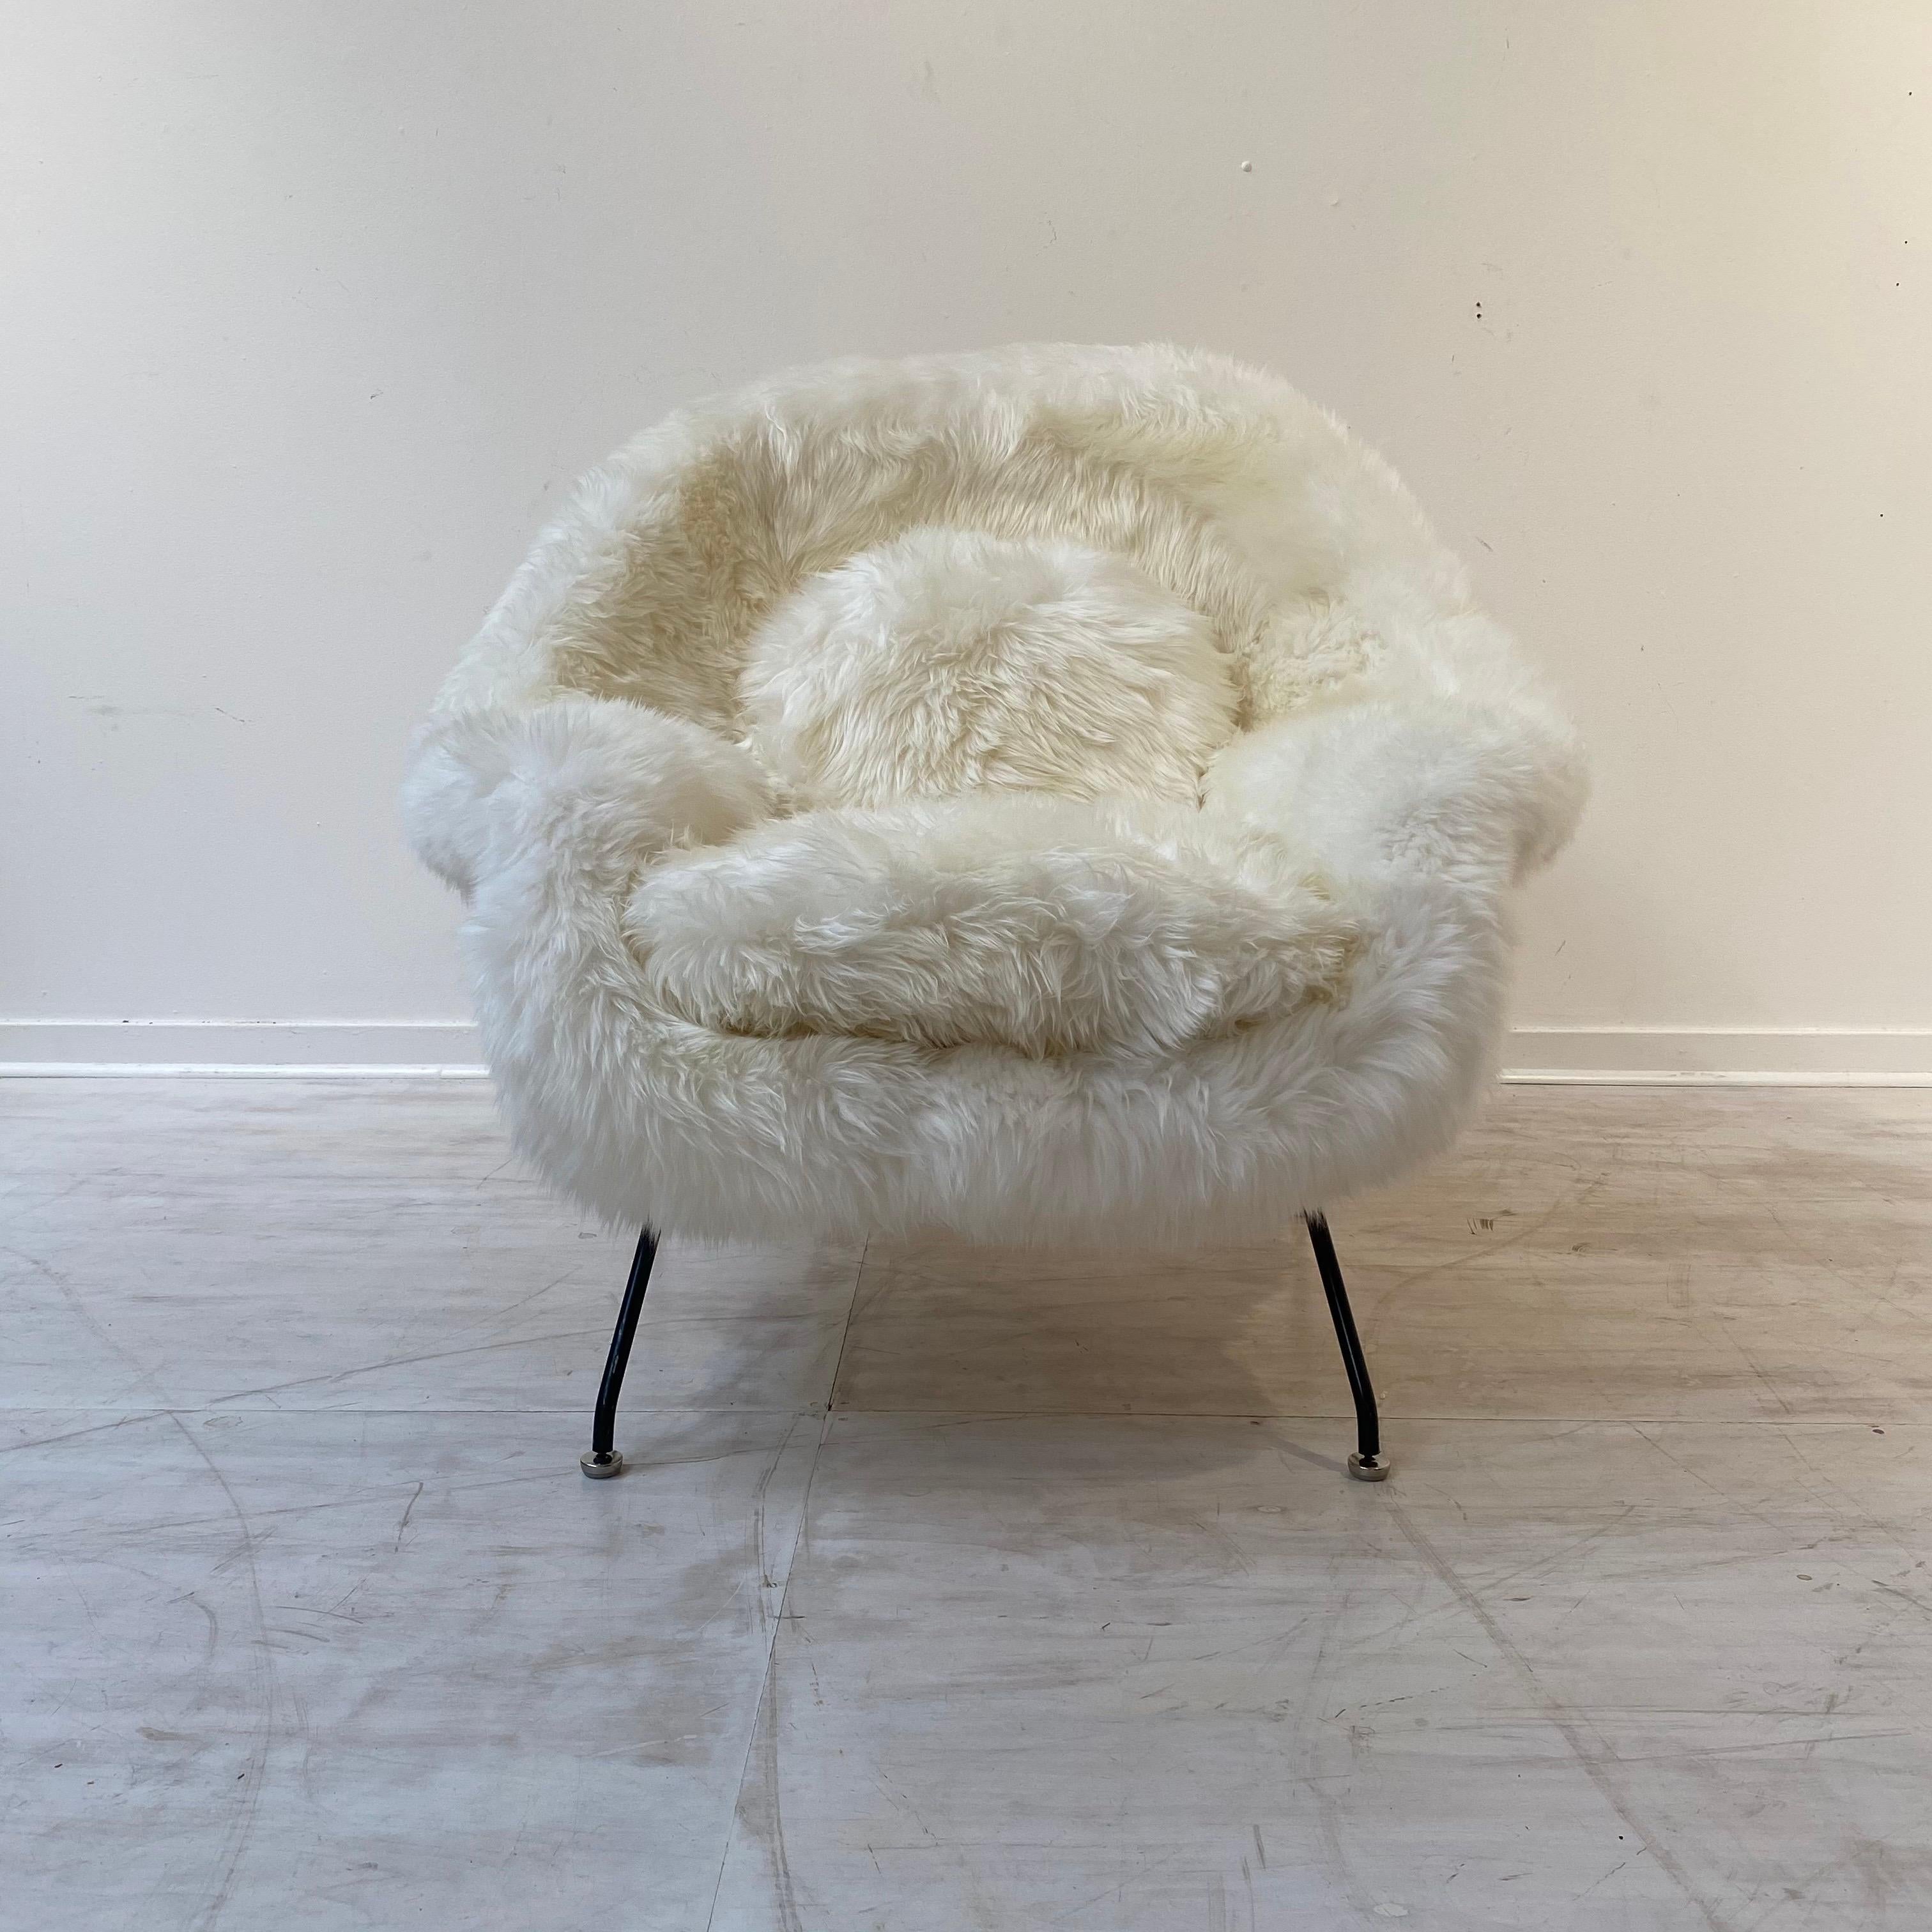 Outstanding and expertly restored womb chair by Eero Saarinen produced by Knoll. This piece has a stunning and luxurious natural sheepskin upholstery.